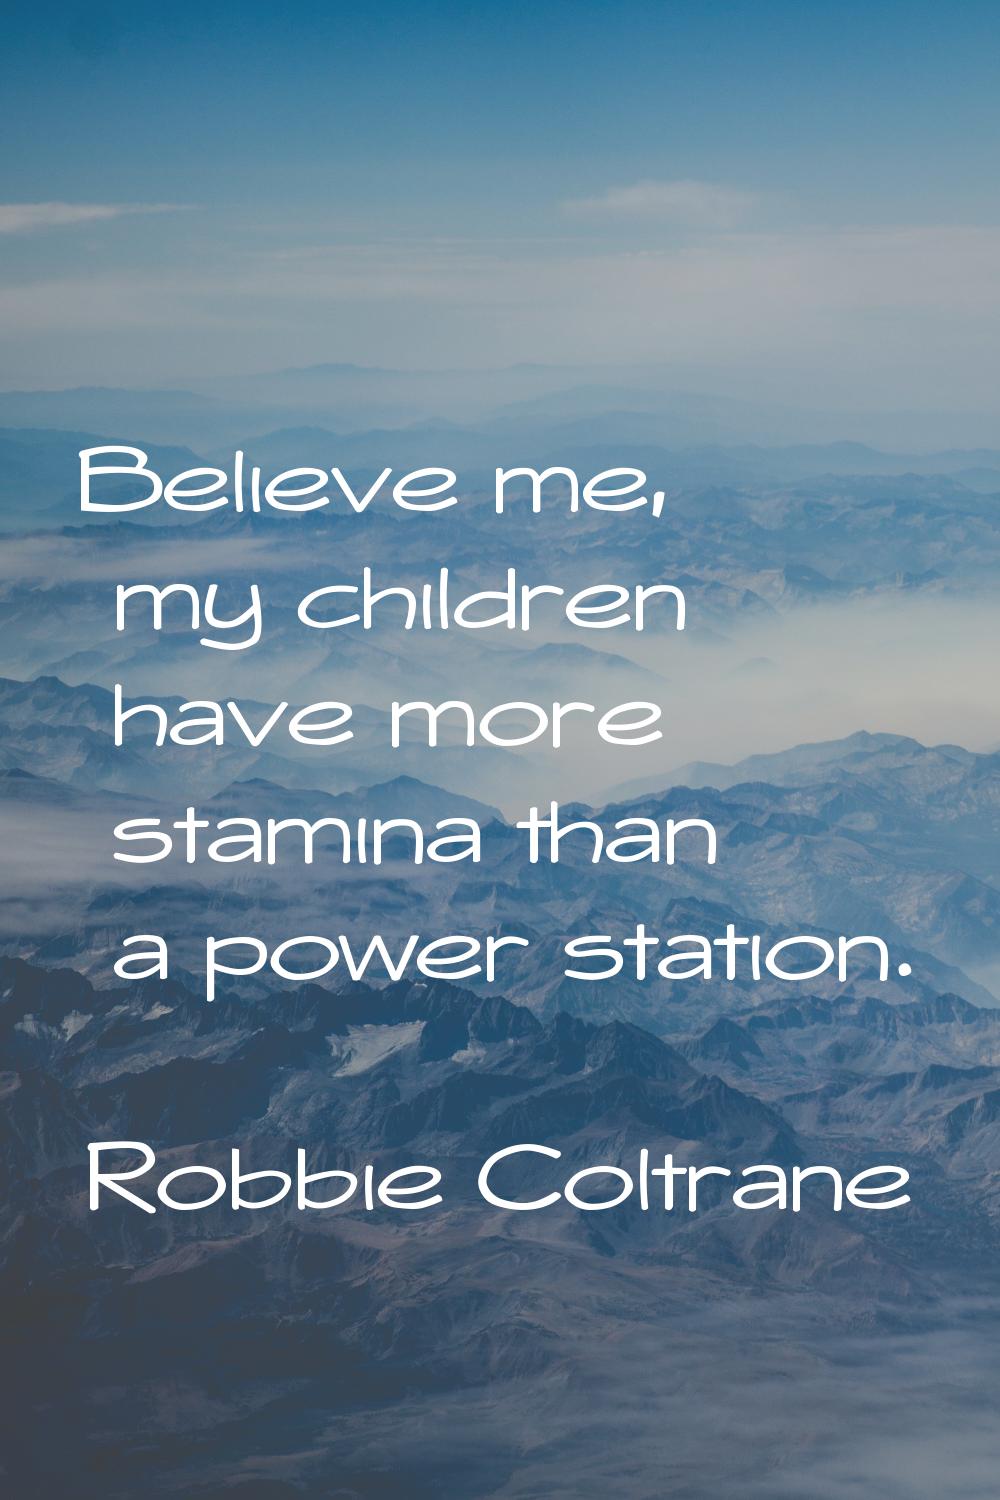 Believe me, my children have more stamina than a power station.